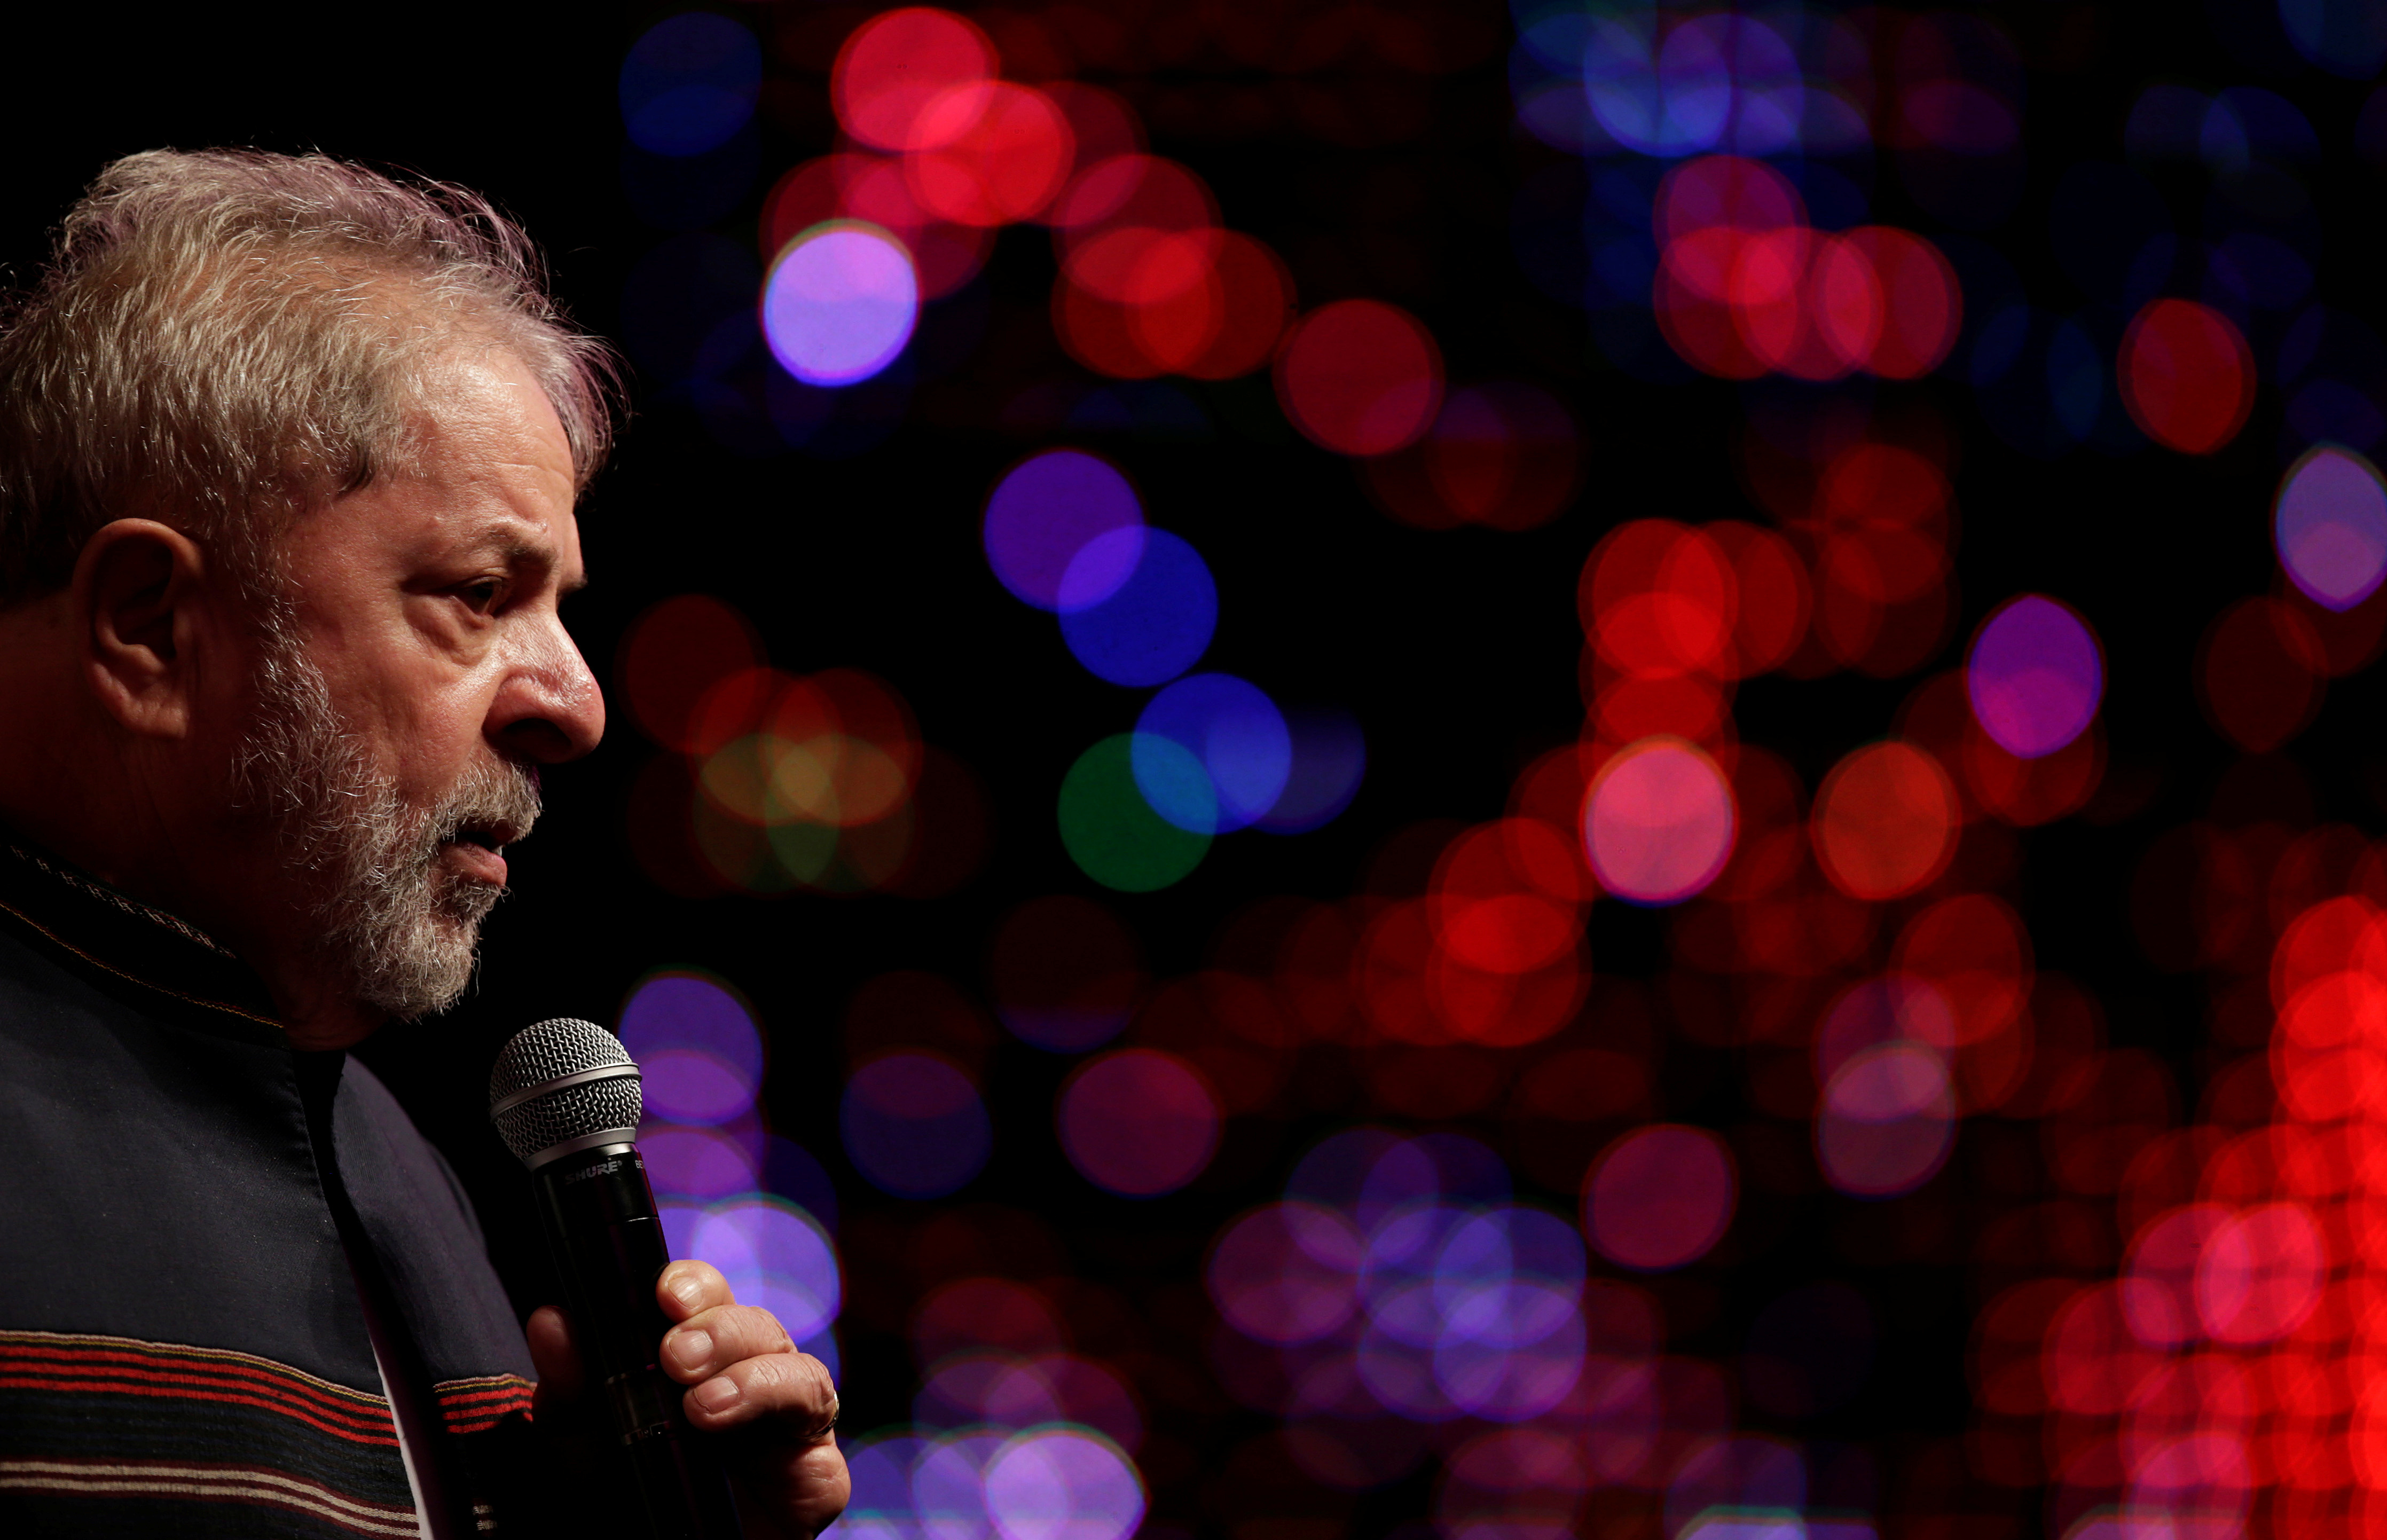 Brazil's former President Luis Inacio Lula da Silva talks during an event in support of his candidacy for president in Rio de Janeiro